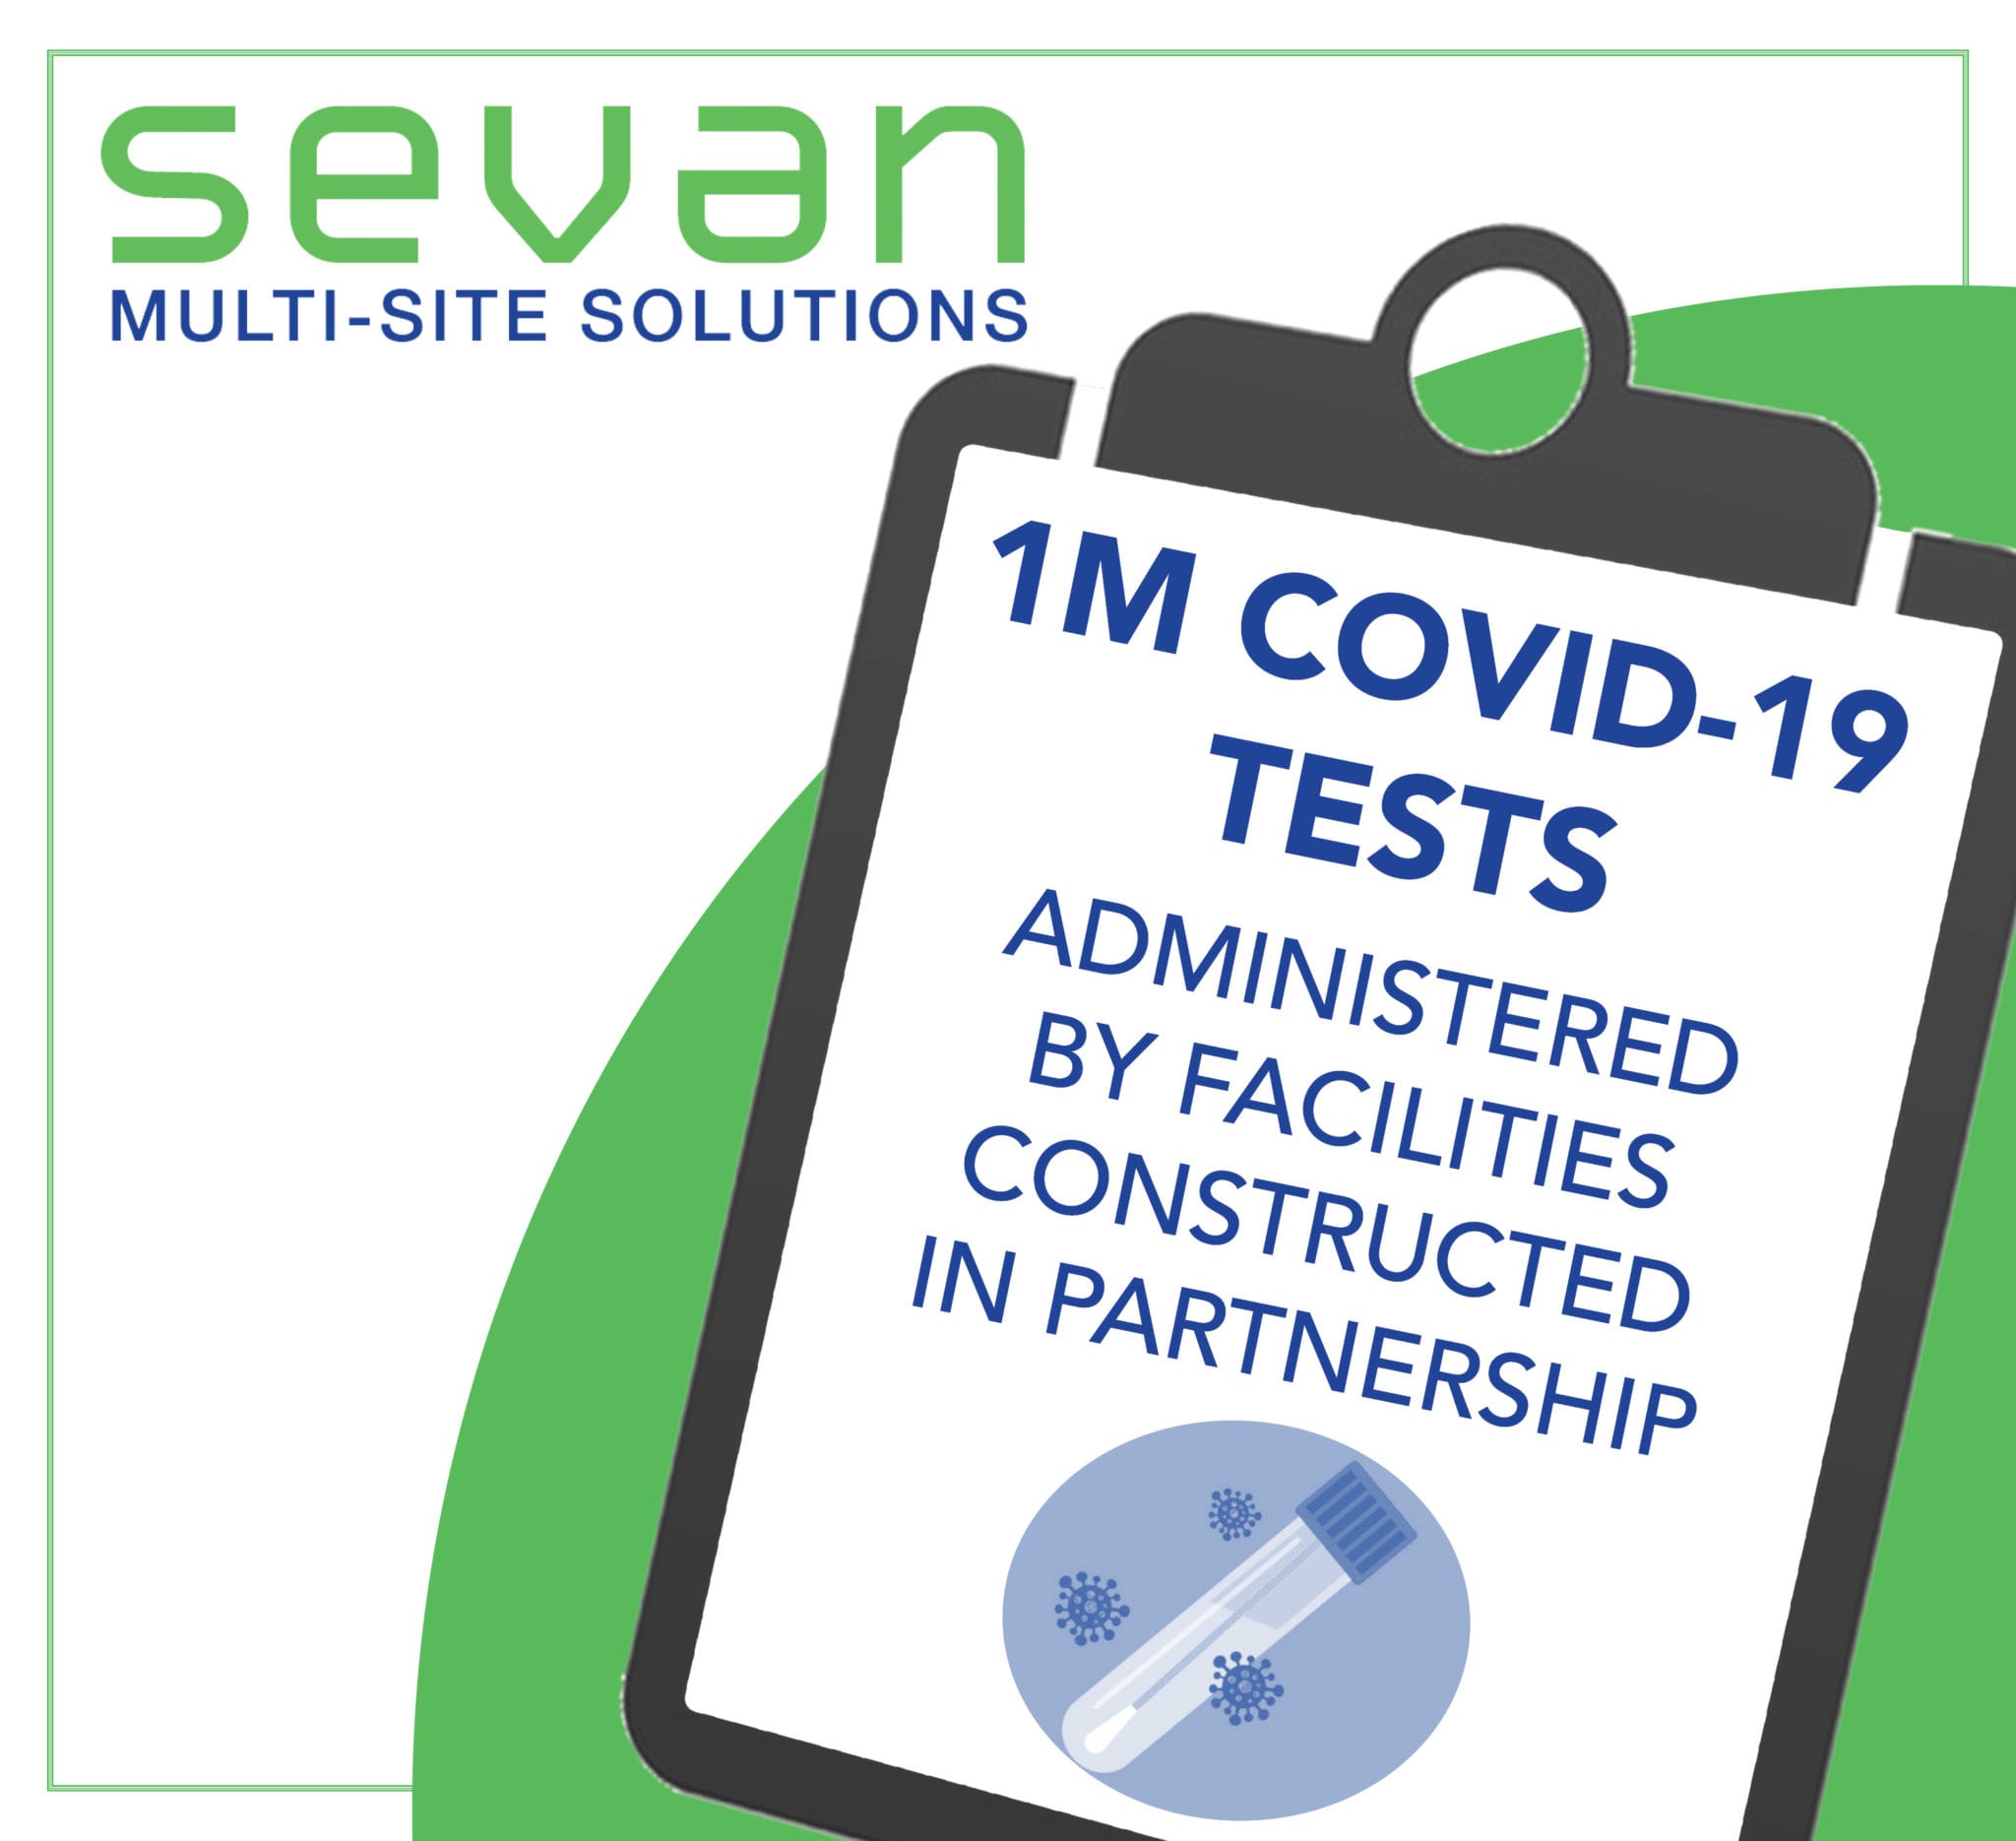 1M COVID Tests website graphic ANONYMOUS